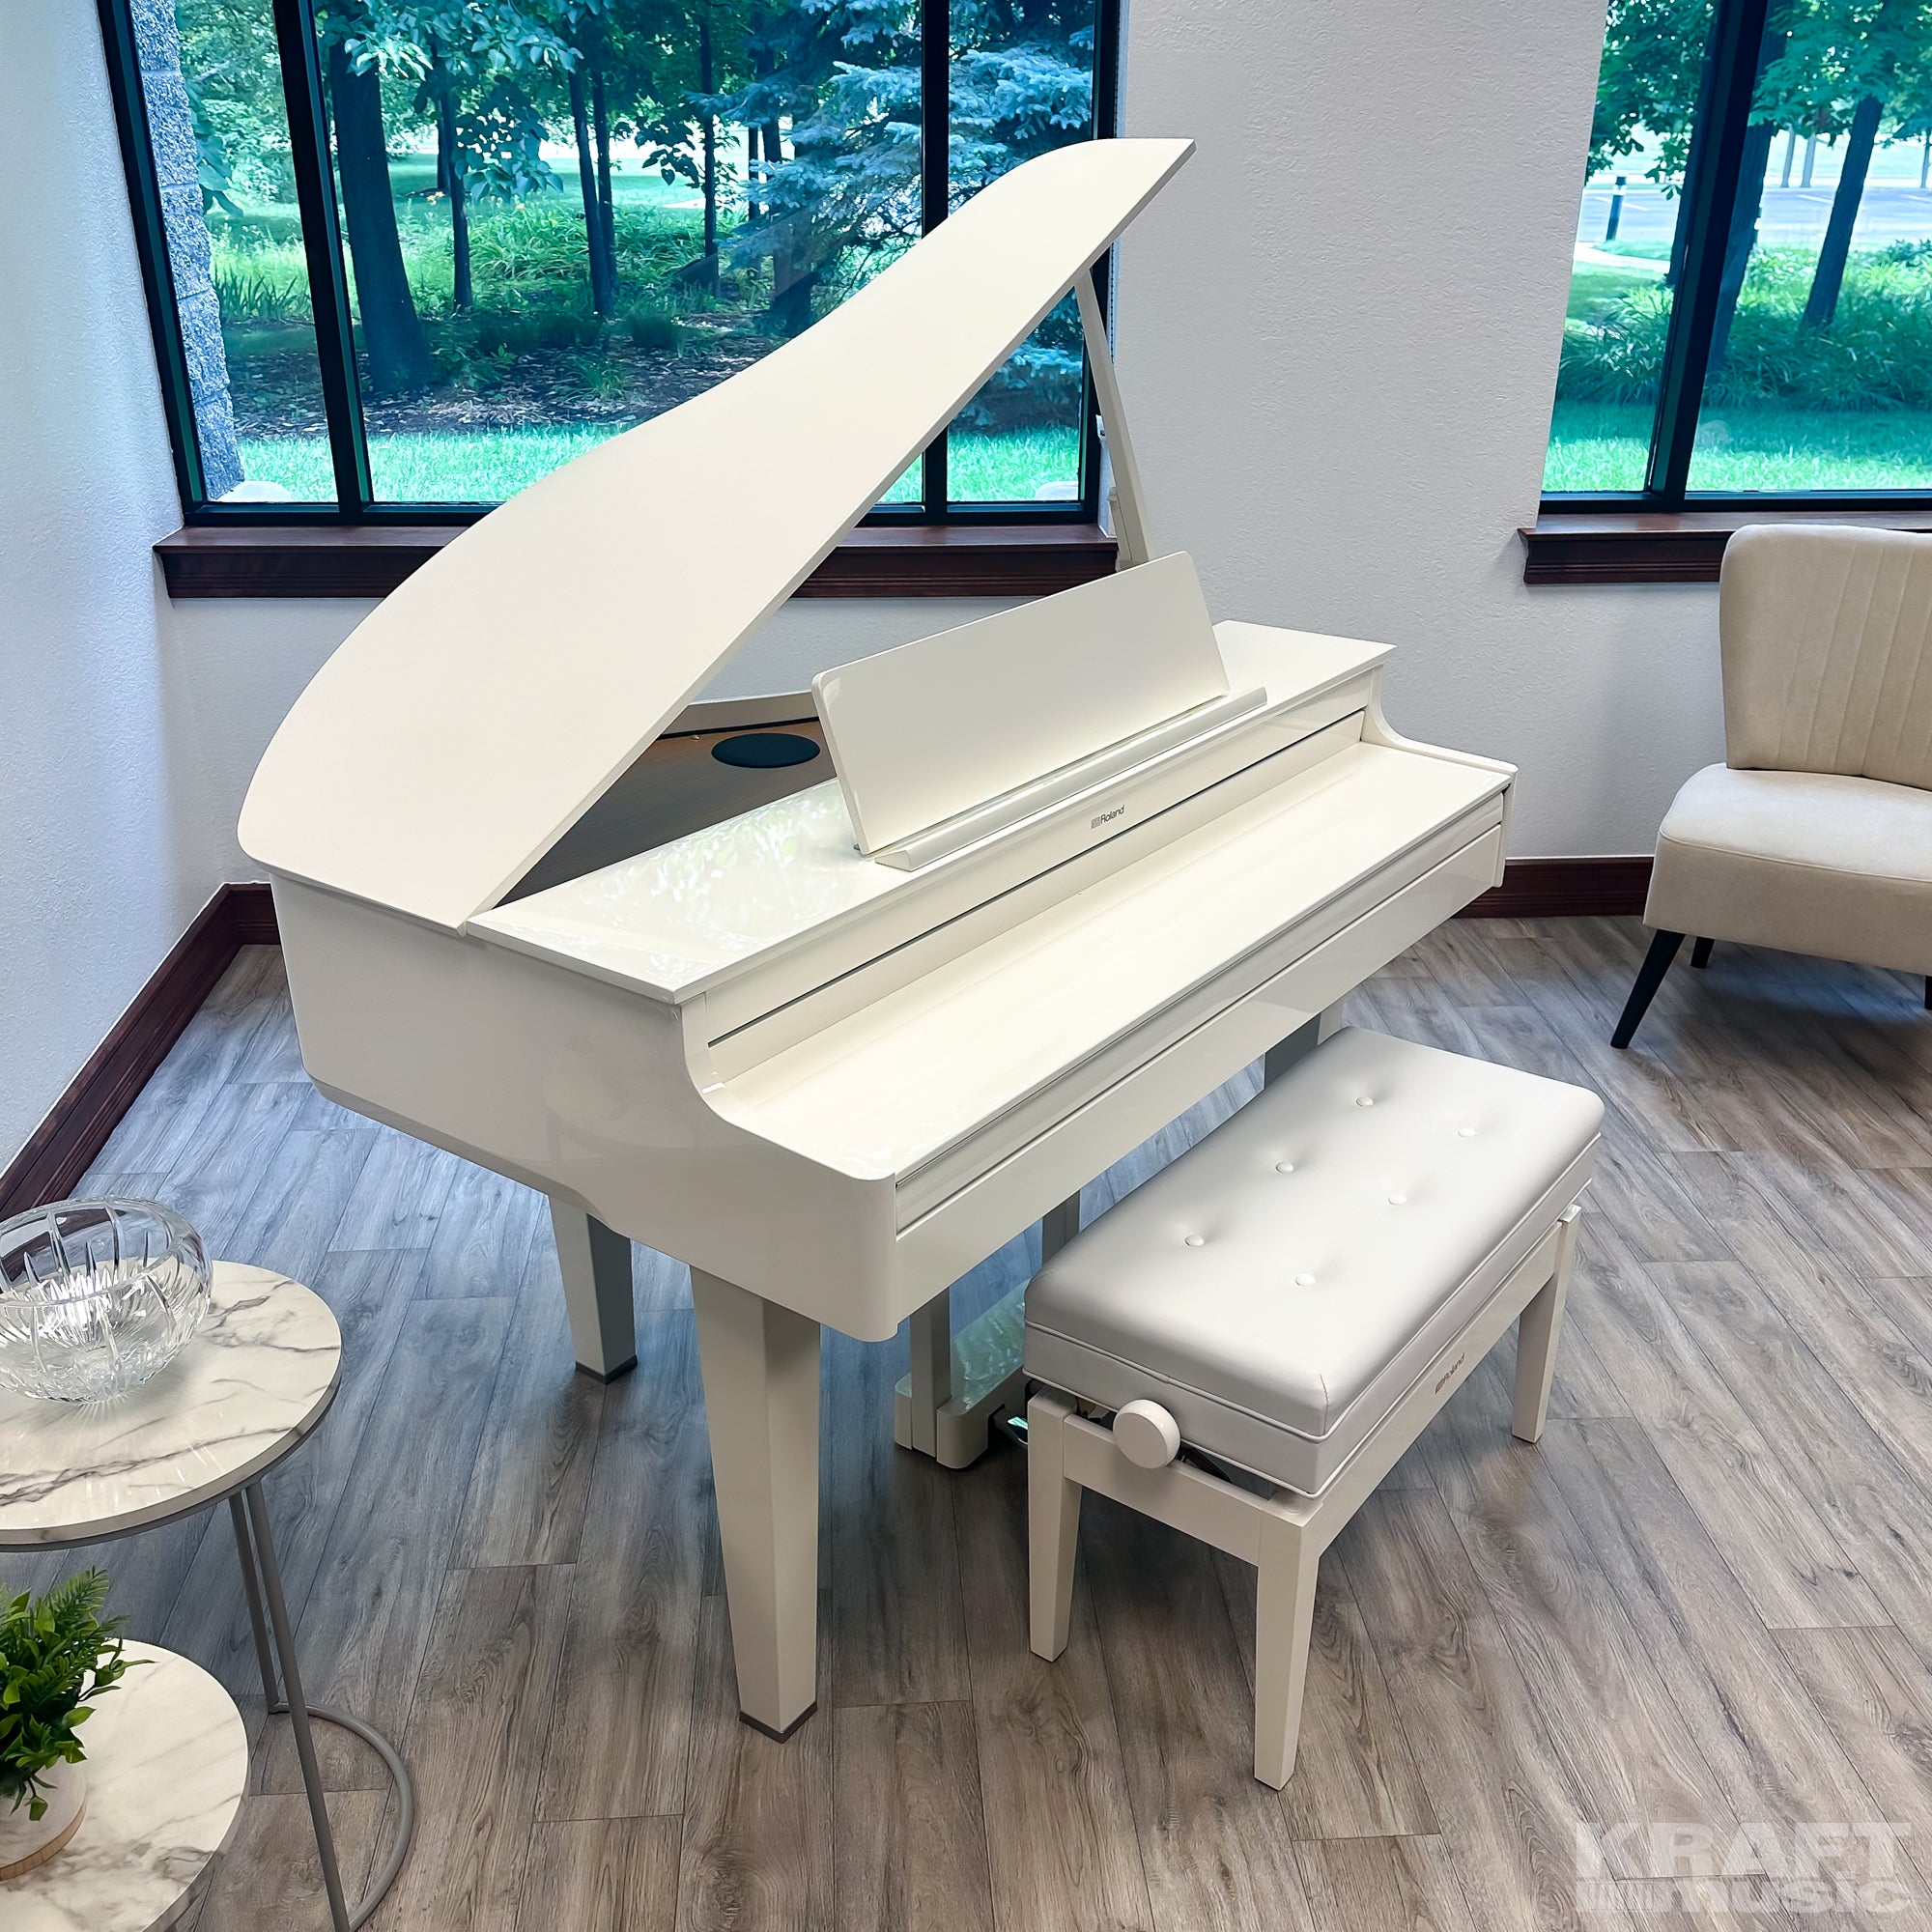 Roland GP-6 Digital Grand Piano - Polished White - right angle from above with key cover closed